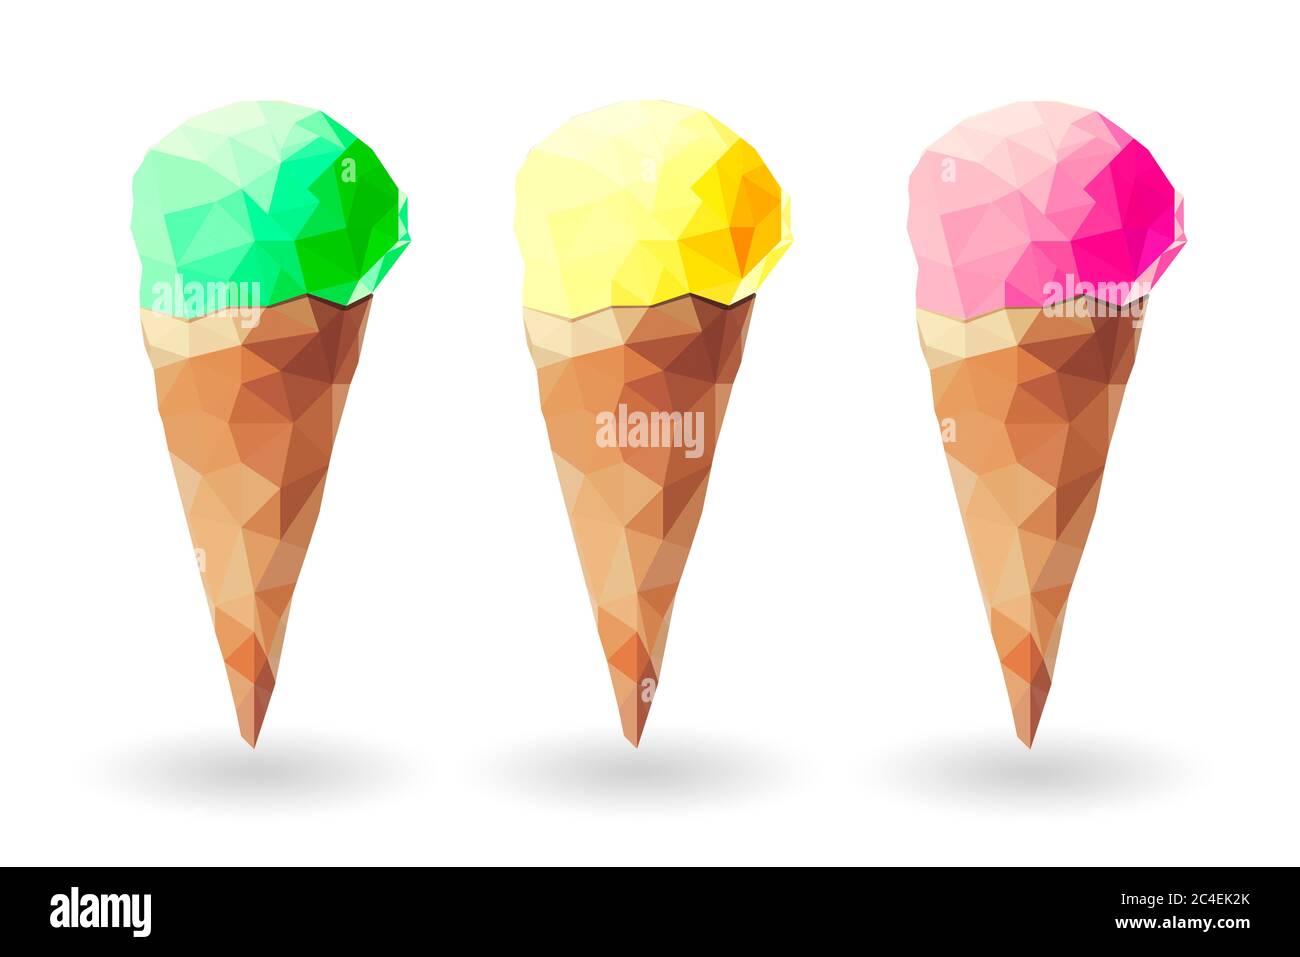 https://c8.alamy.com/comp/2C4EK2K/low-poly-illustration-of-three-sweet-delicious-yellow-lemon-ice-creams-against-white-background-summer-concept-and-empty-copy-space-for-editors-text-2C4EK2K.jpg